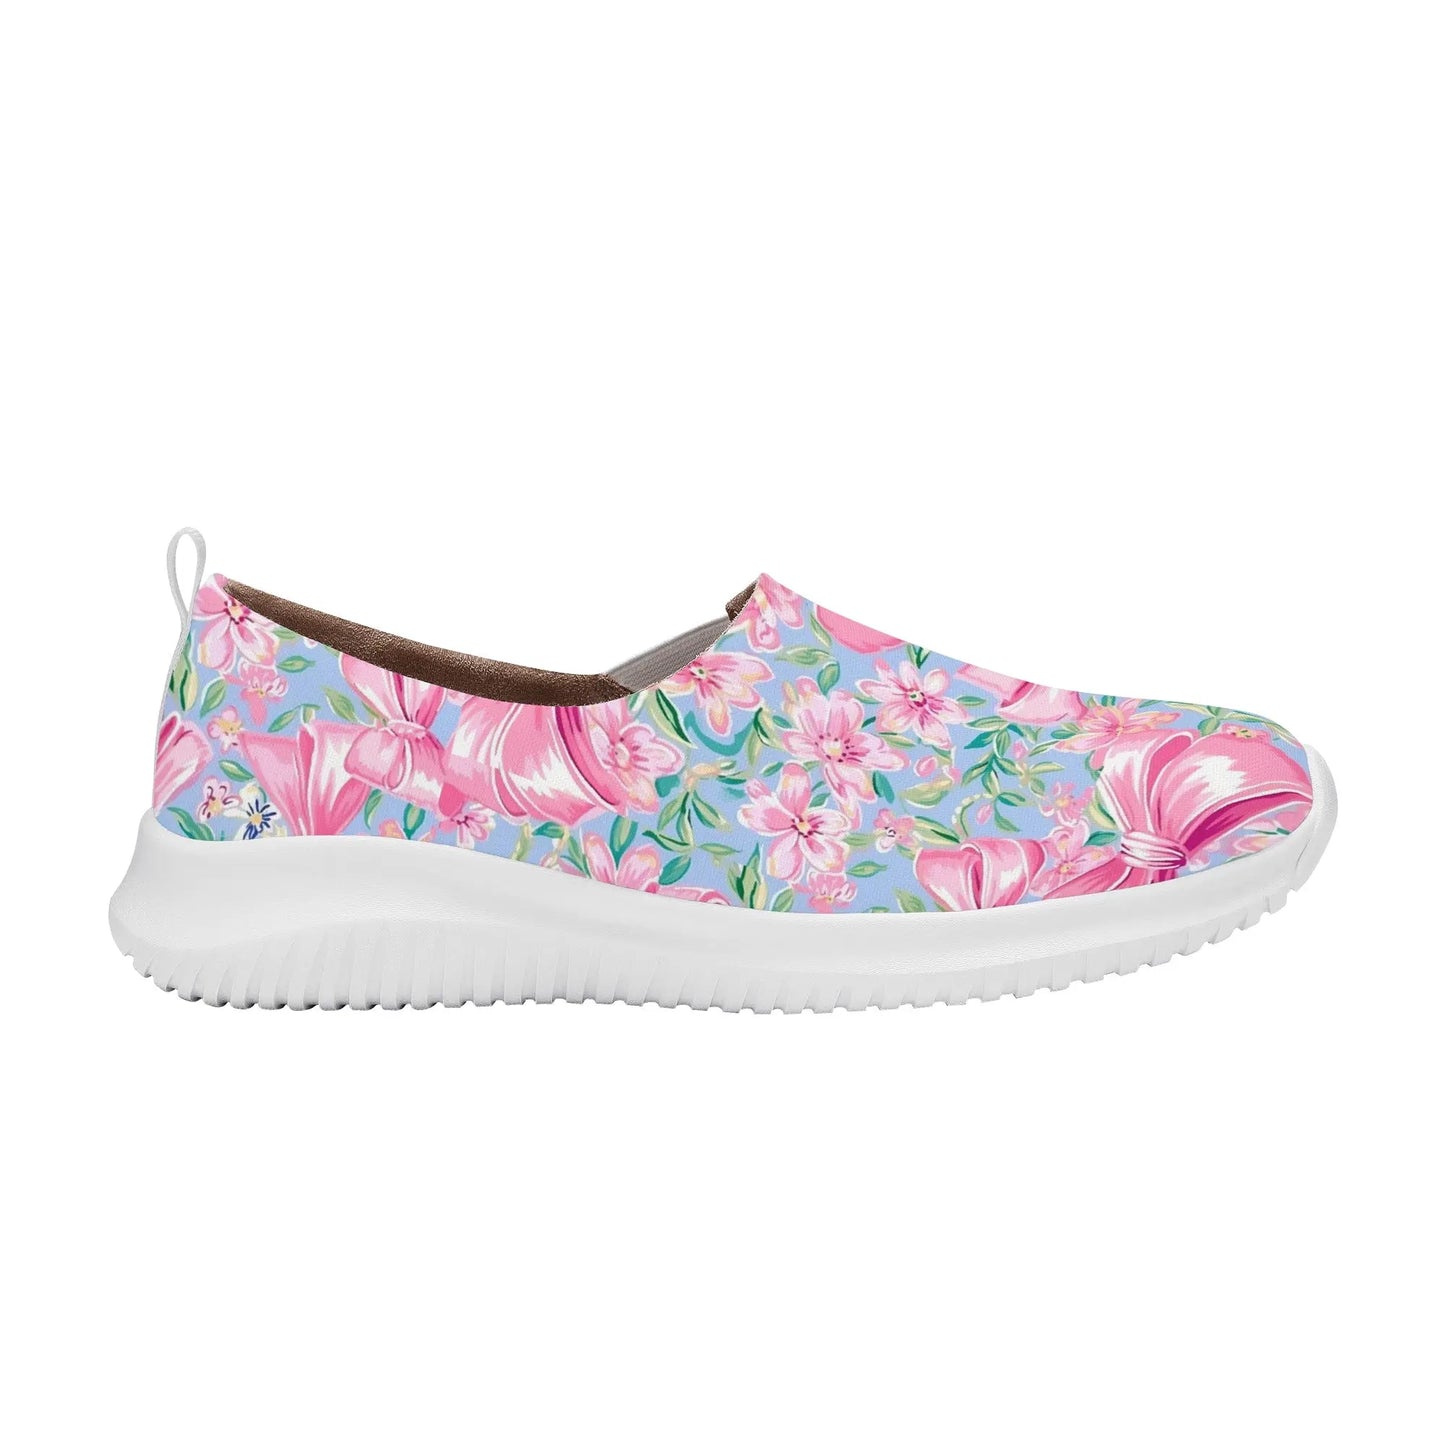 Womens Nursing Slip On Shoes - An Initial Impression